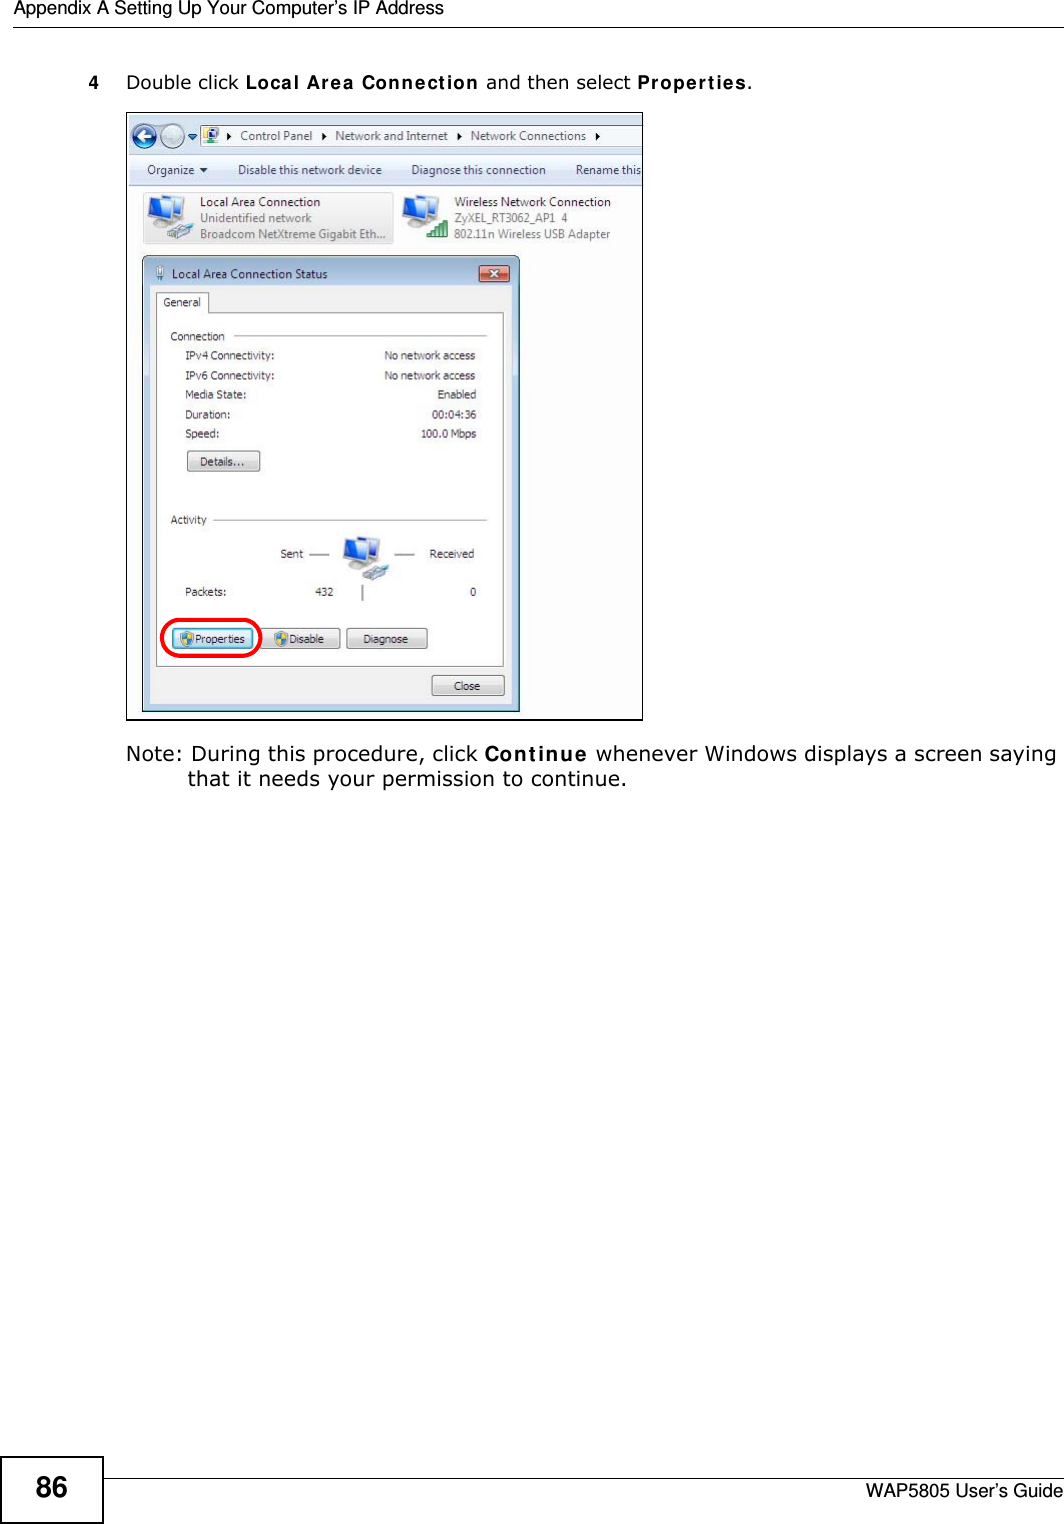 Appendix A Setting Up Your Computer’s IP AddressWAP5805 User’s Guide864Double click Local Area Connection and then select Properties.Note: During this procedure, click Continue whenever Windows displays a screen saying that it needs your permission to continue.